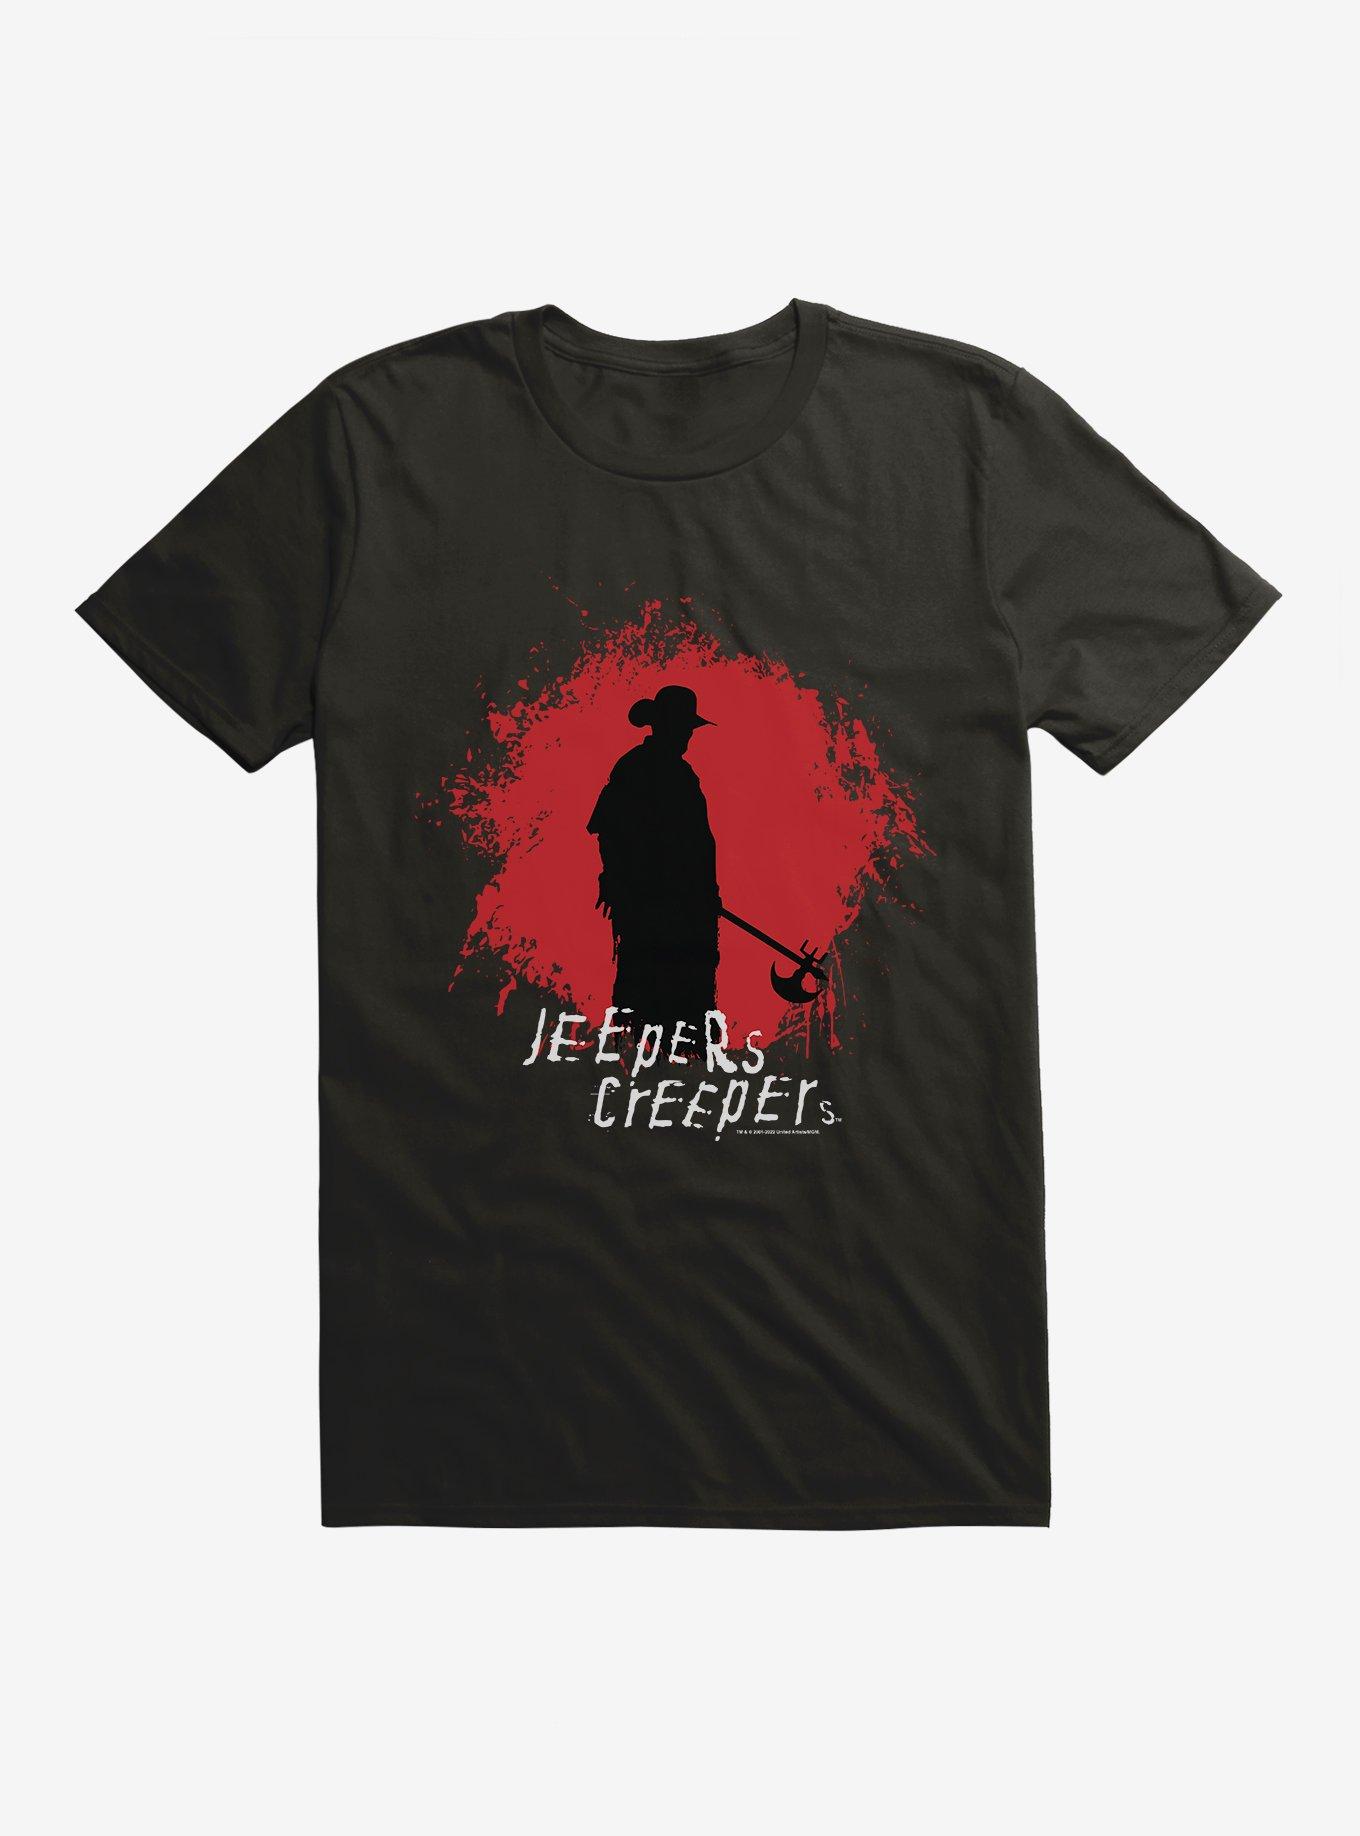 Jeepers Creepers The Creeper T-Shirt